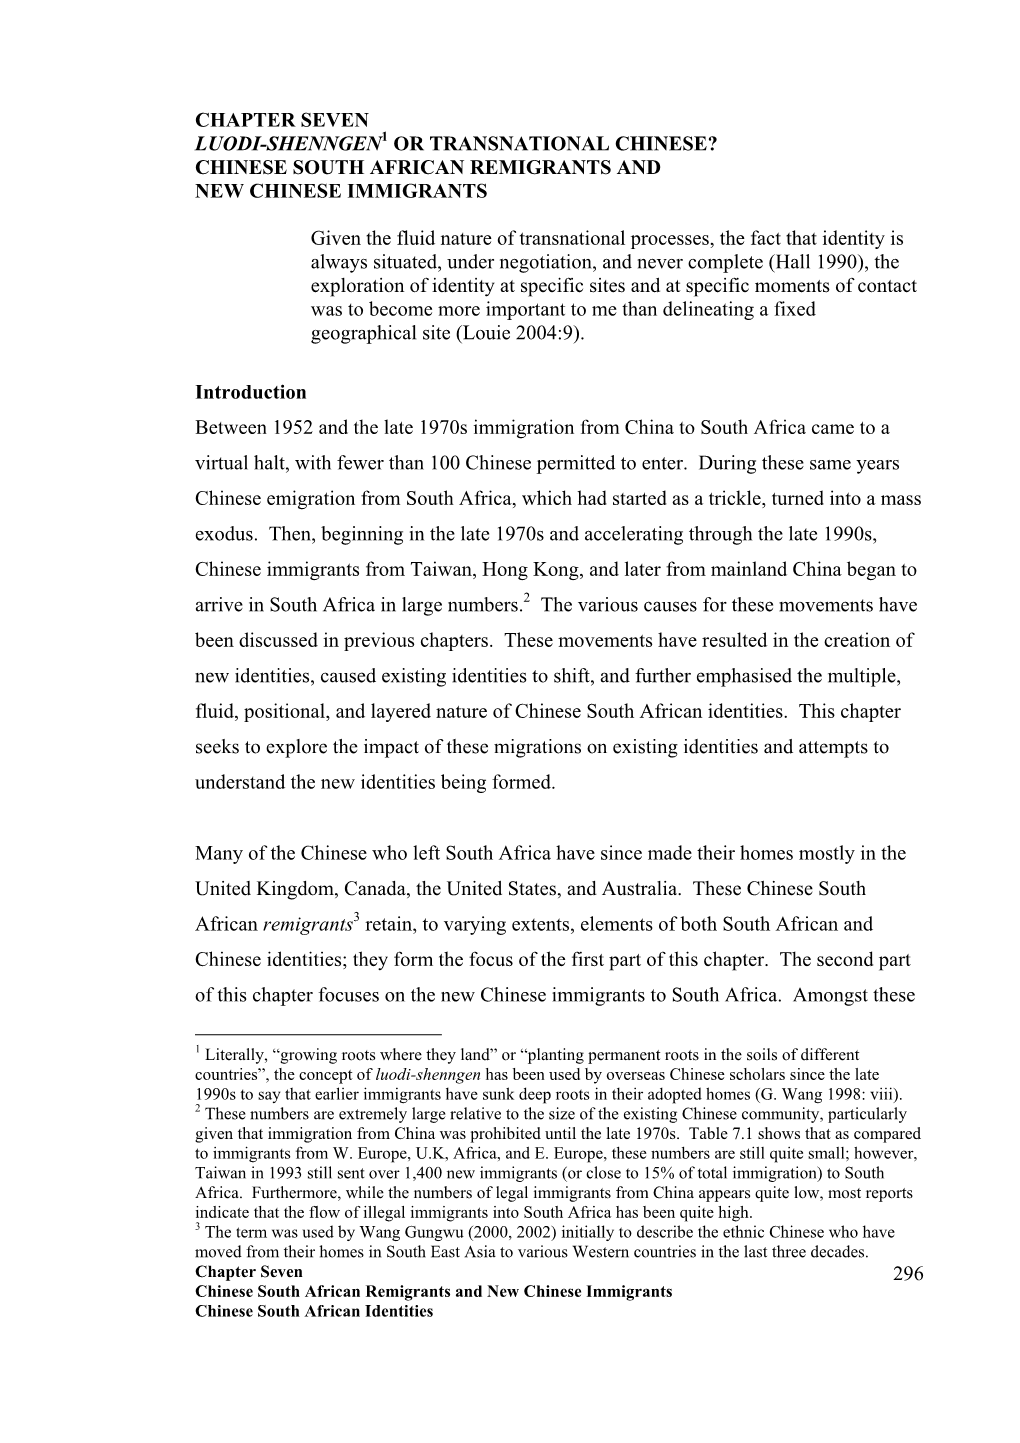 Chinese South African Remigrants and New Chinese Immigrants